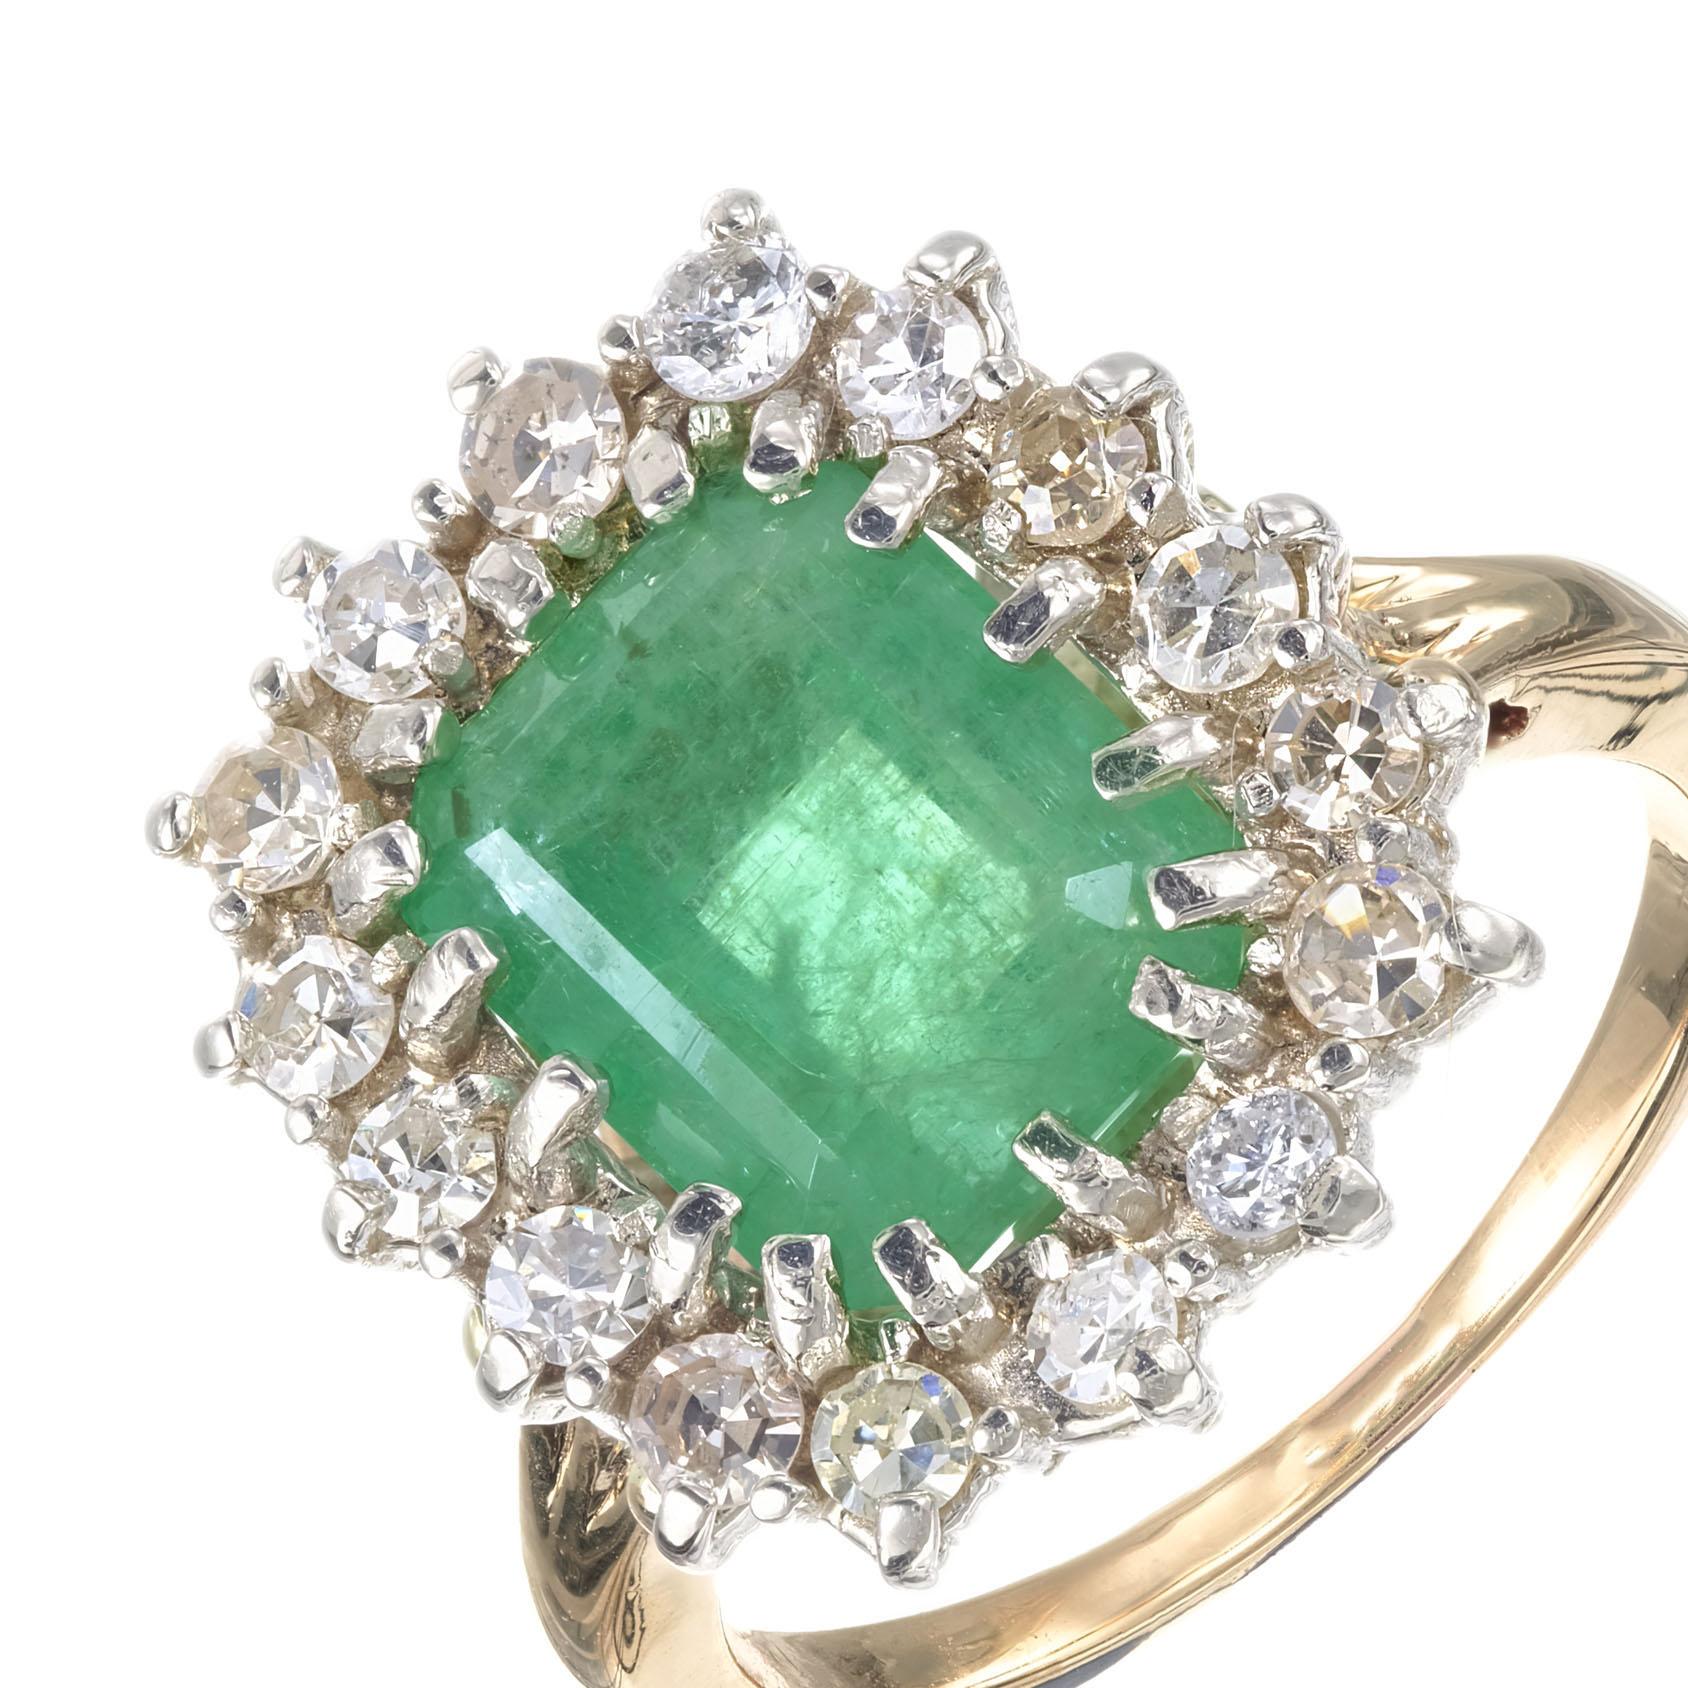 Handmade 18k yellow gold emerald diamond ring. Emerald cut center emerald in a 18 white gold crown with a halo of 16 round diamonds. 18k yellow gold setting. Circa 1940's. 

1 Emerald cut Emerald 10.8 x 8.8mm, approx. total weight 3.50cts
16 round